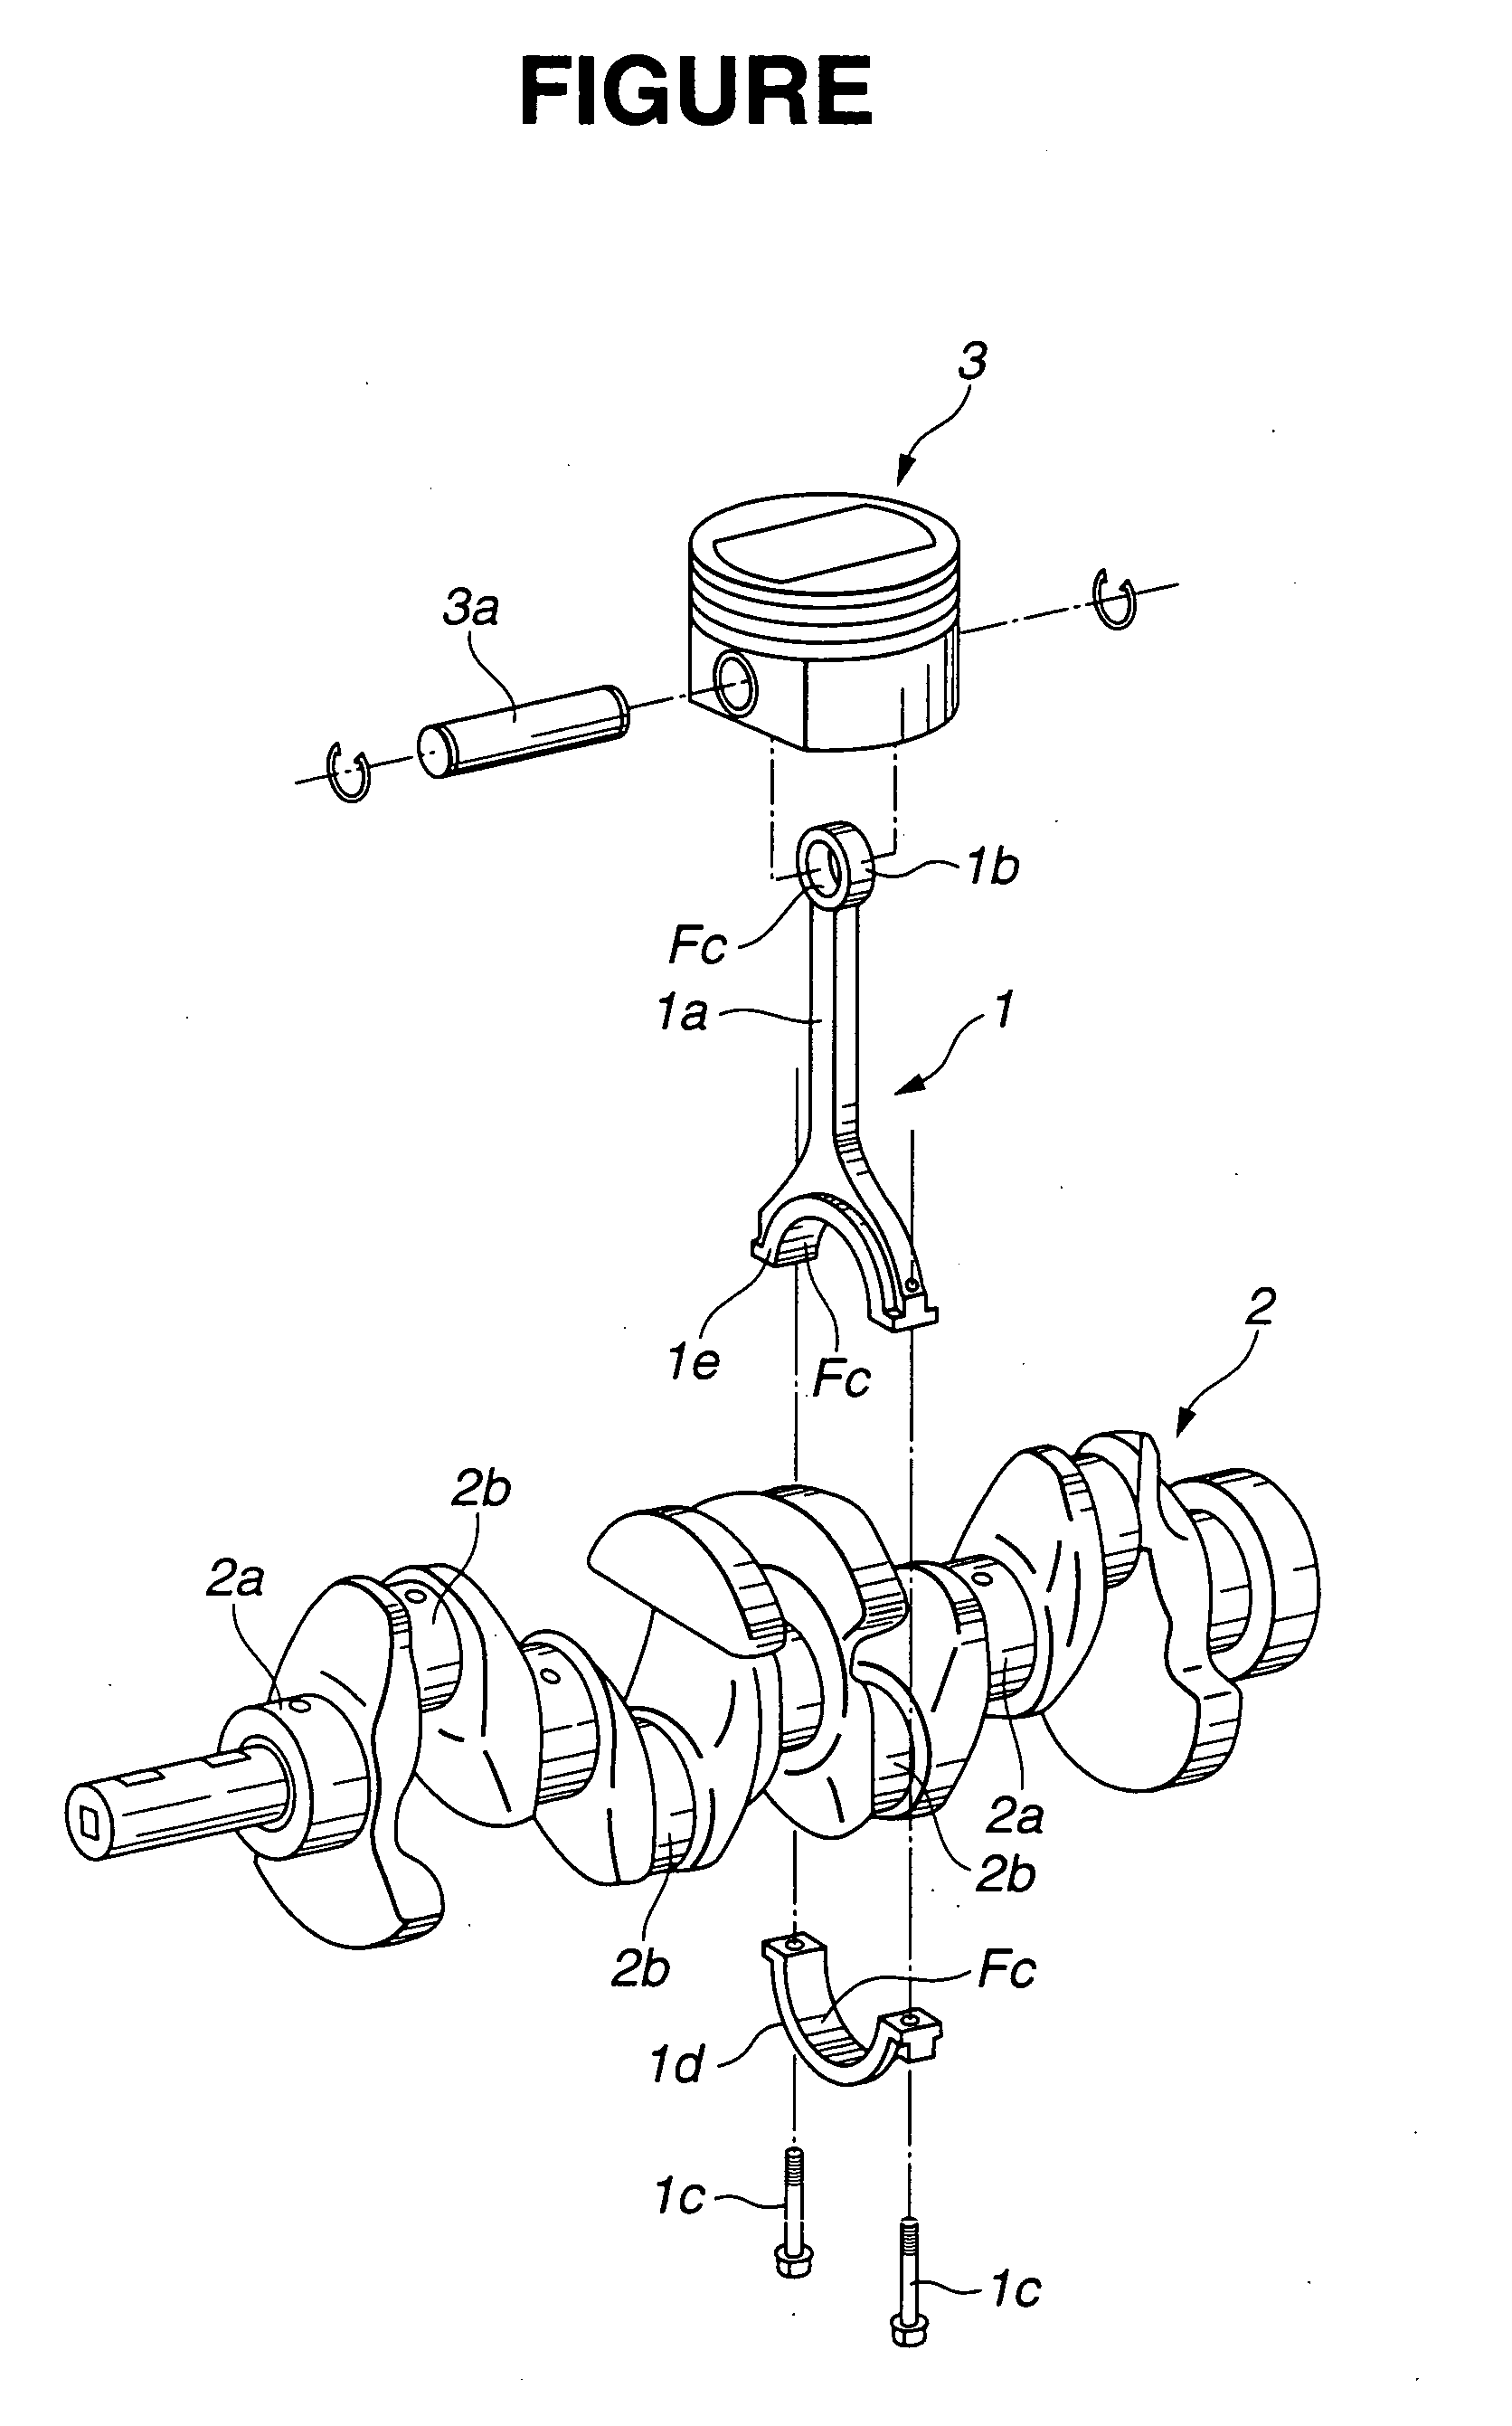 Structure for connecting piston to crankshaft